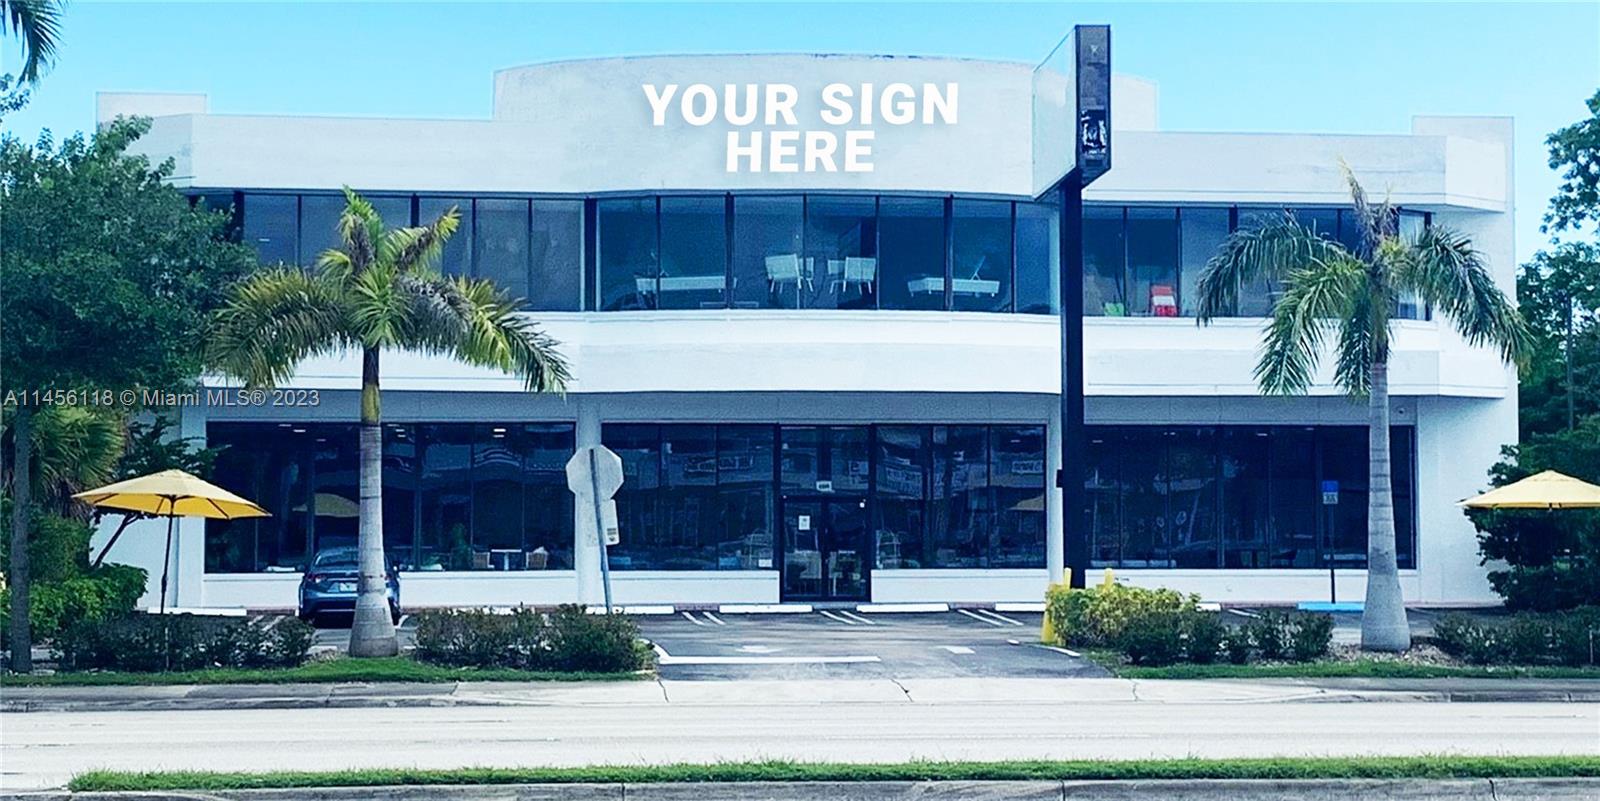 Property Features
• 13,001 SF of retail space available
• $37.00 PSF, NNN
• Two-story retail/showroom
• Pylon and façade signage

Location Features
• Excellent frontage on South Dixie Highway (US-1)
• Great visibility from the Palmetto Expressway (SR-826)
• Located in the heart of Pinecrest with close proximity to retail stores and restaurants